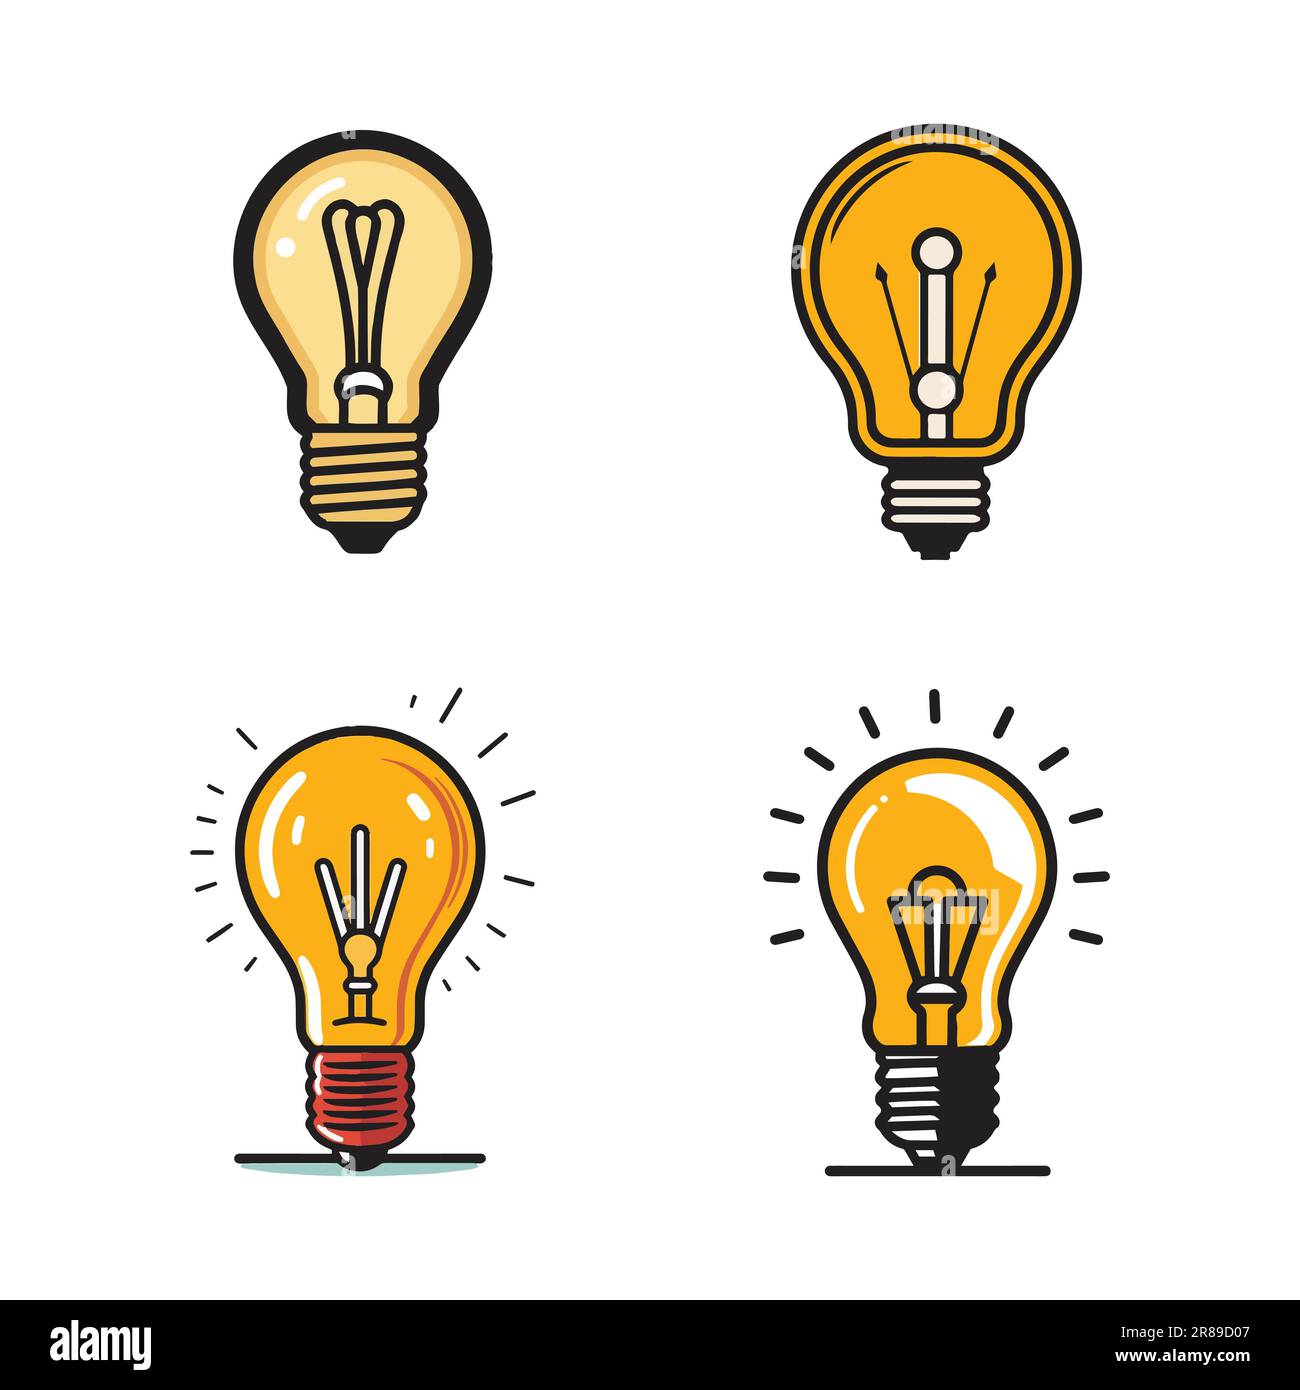 Hand Drawn vintage light bulb logo in flat line art style isolated on background Stock Vector